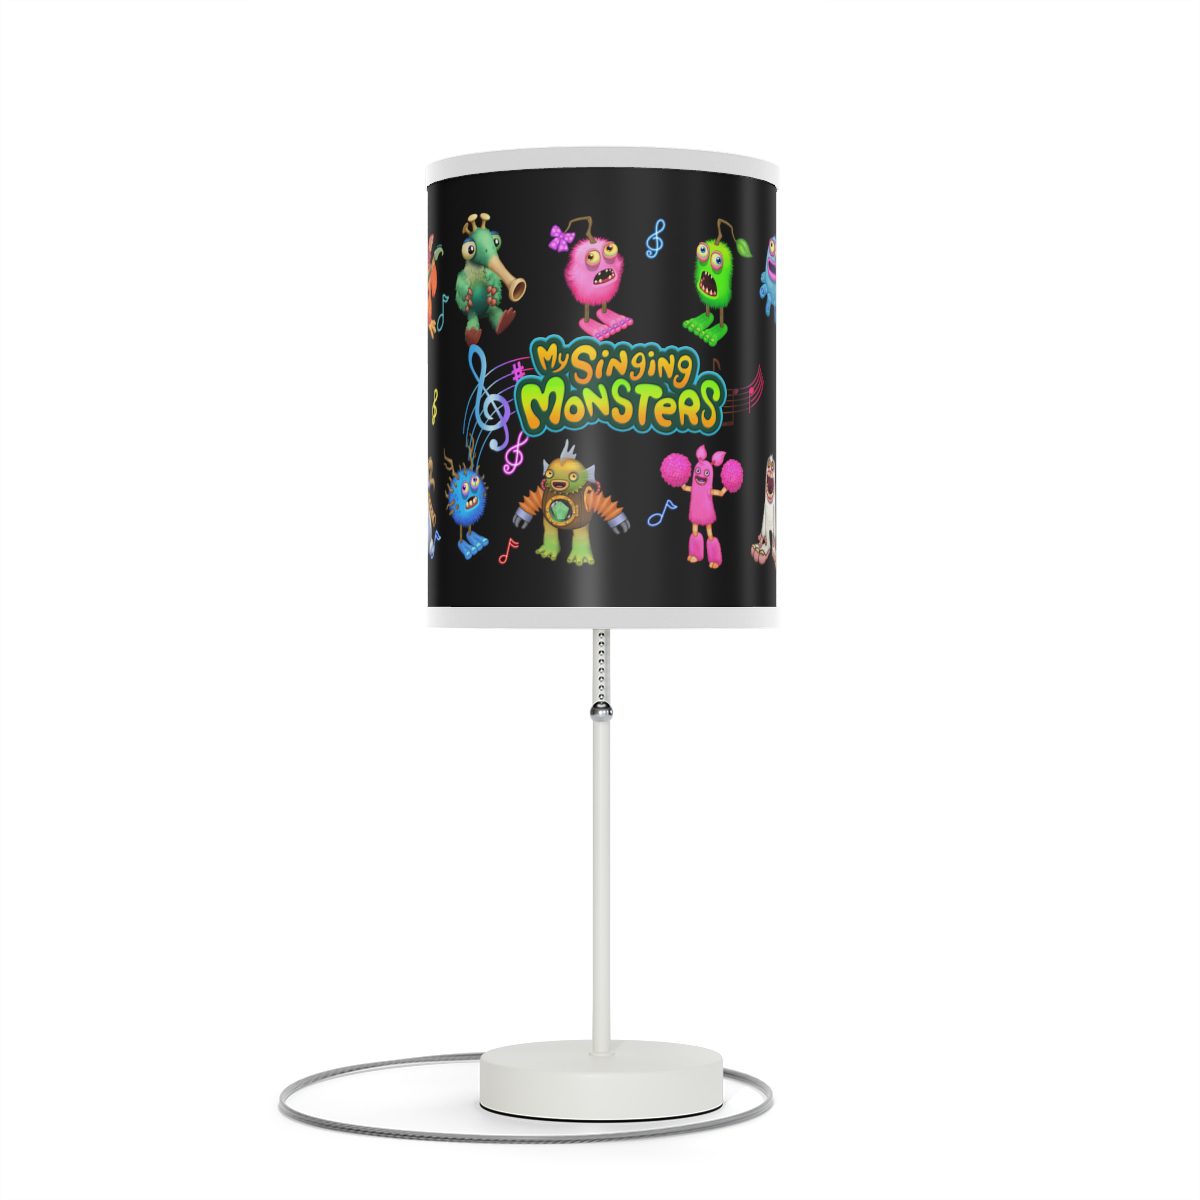 My Singing Monsters Black Lamp with Colorful Characters Cool Kiddo 10